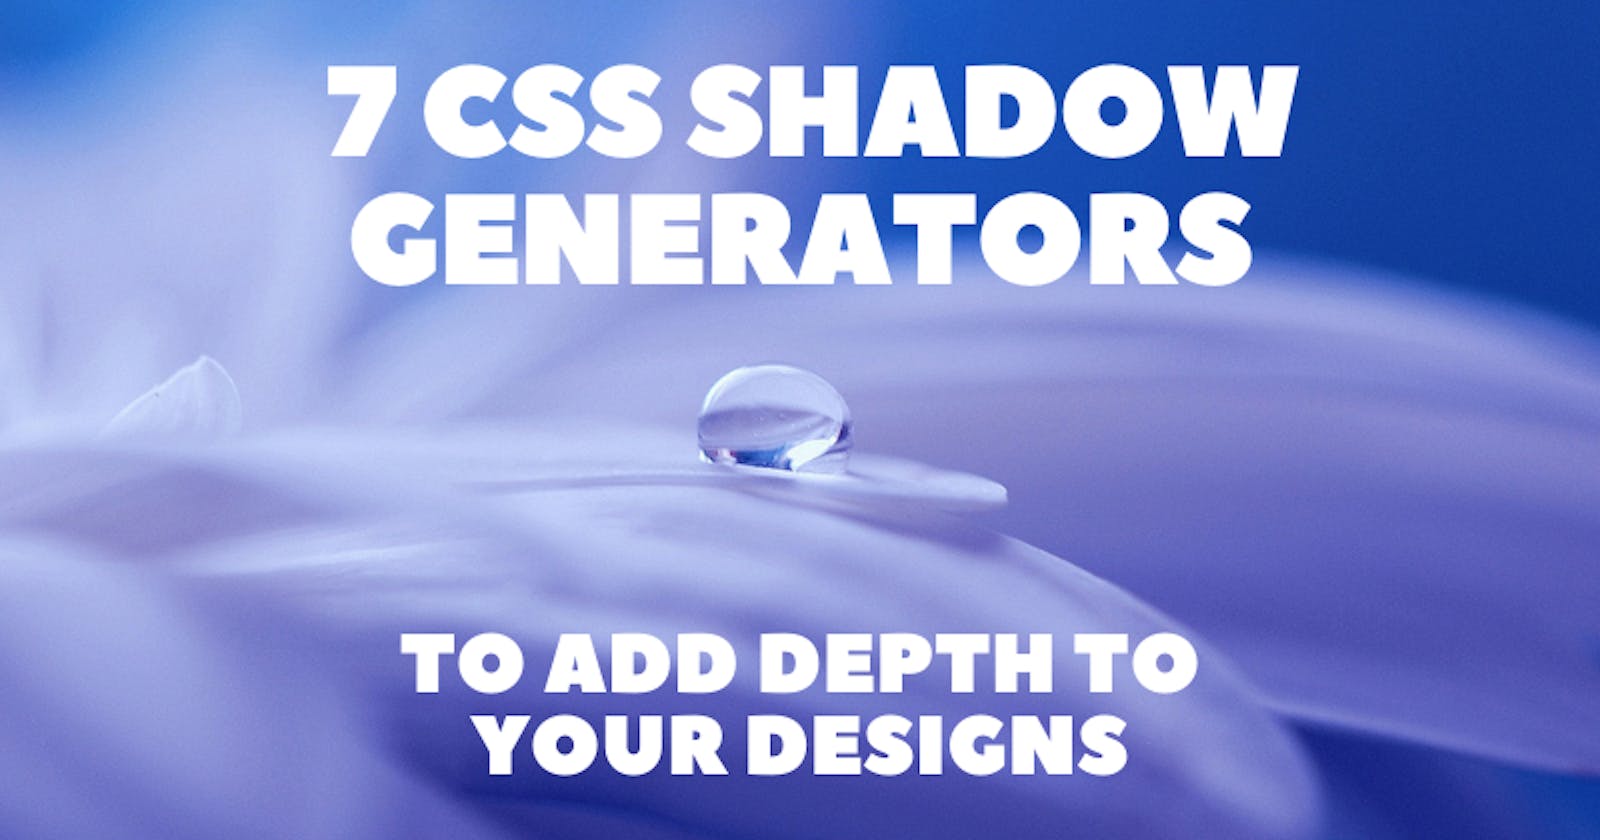 7 CSS Shadow Generators to Add Depth to Your Designs 🎨😍